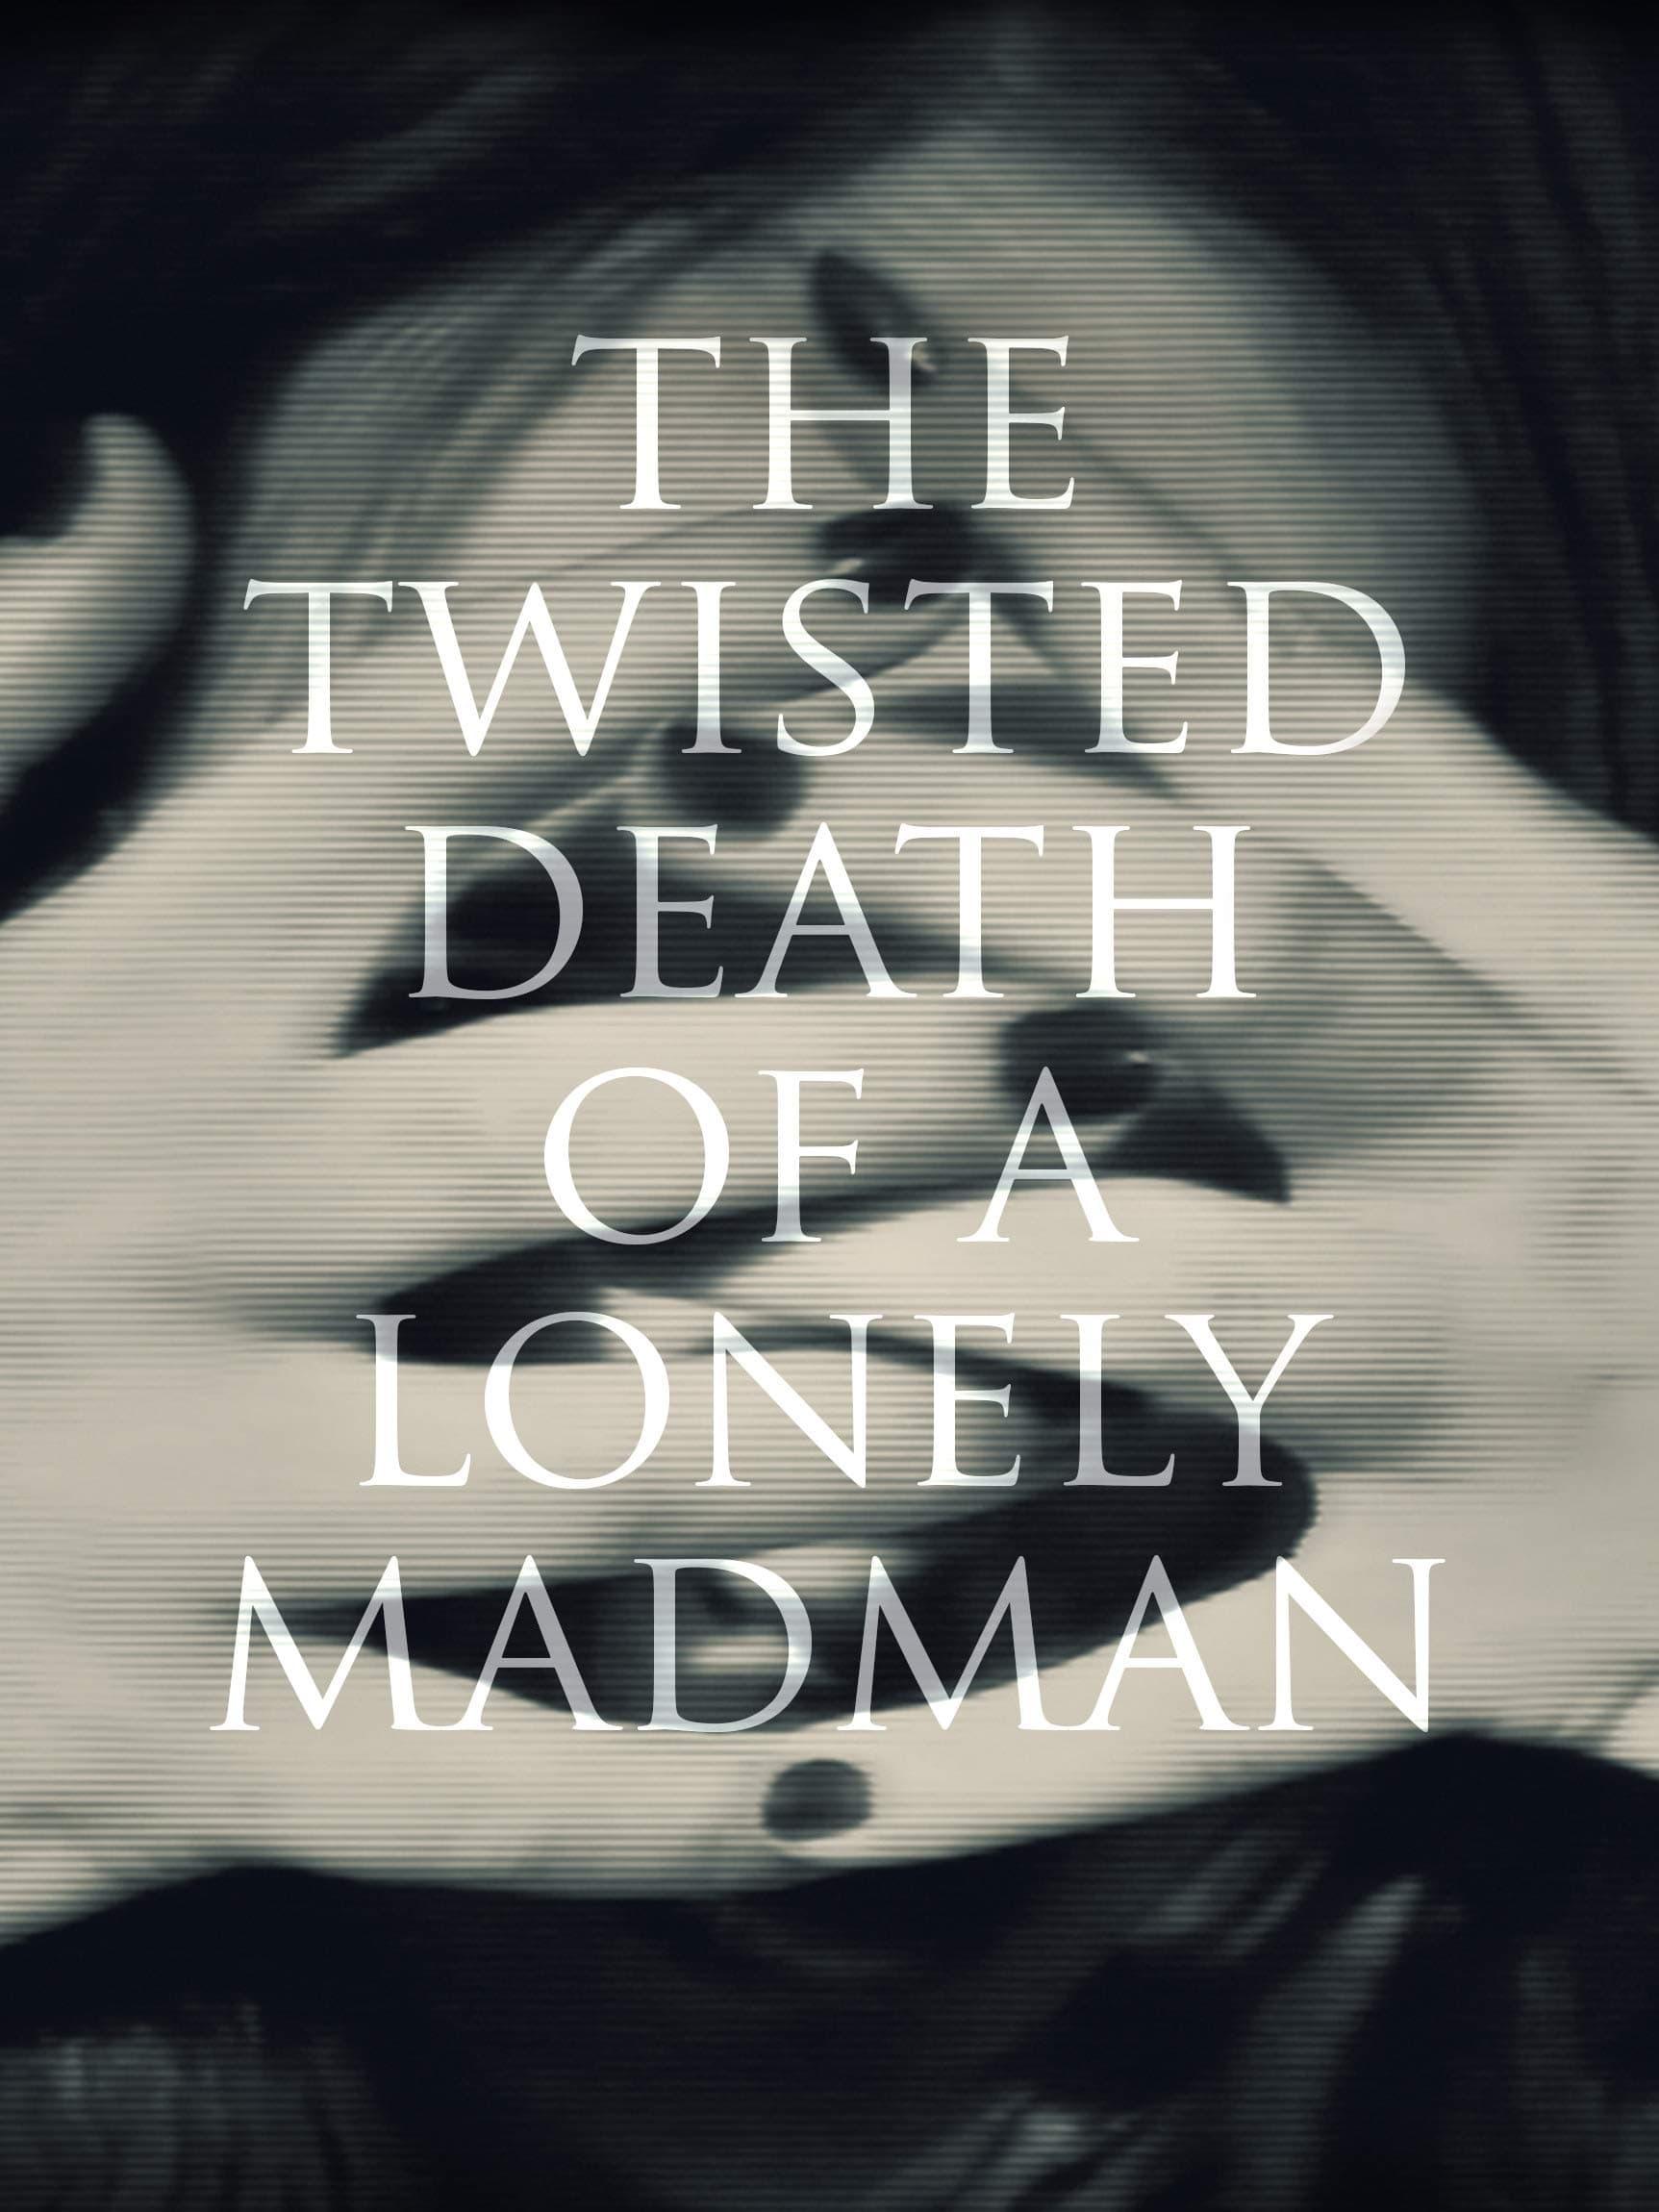 The Twisted Death of a Lonely Madman poster